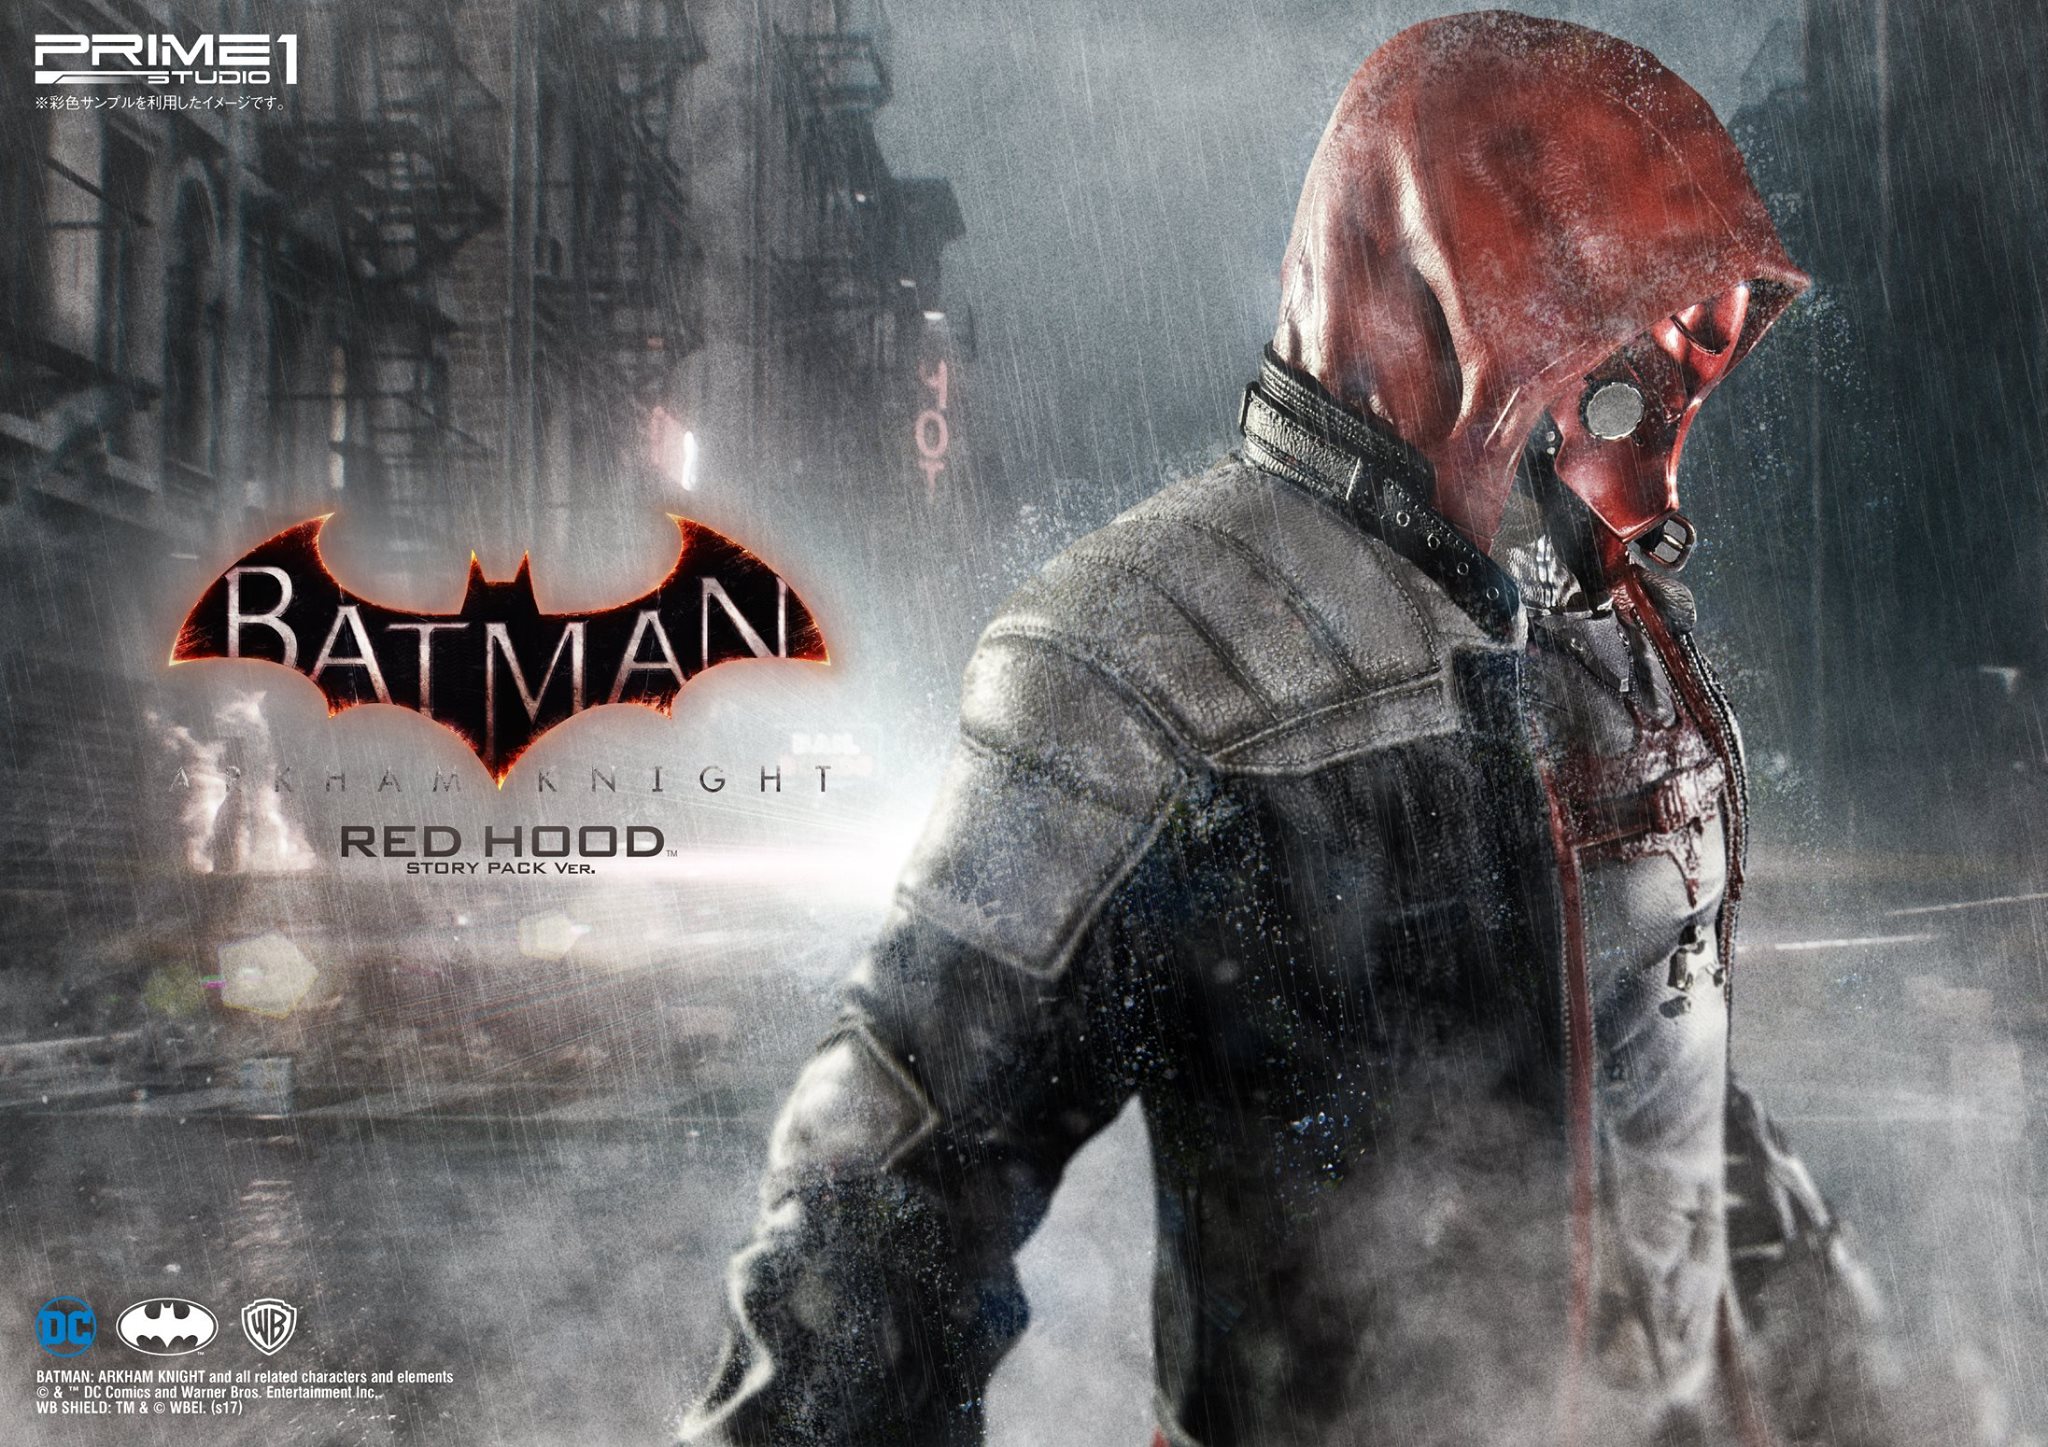 Batman: Arkham Knight Red Hood Story Pack Statue by Prime 1 Studio |  